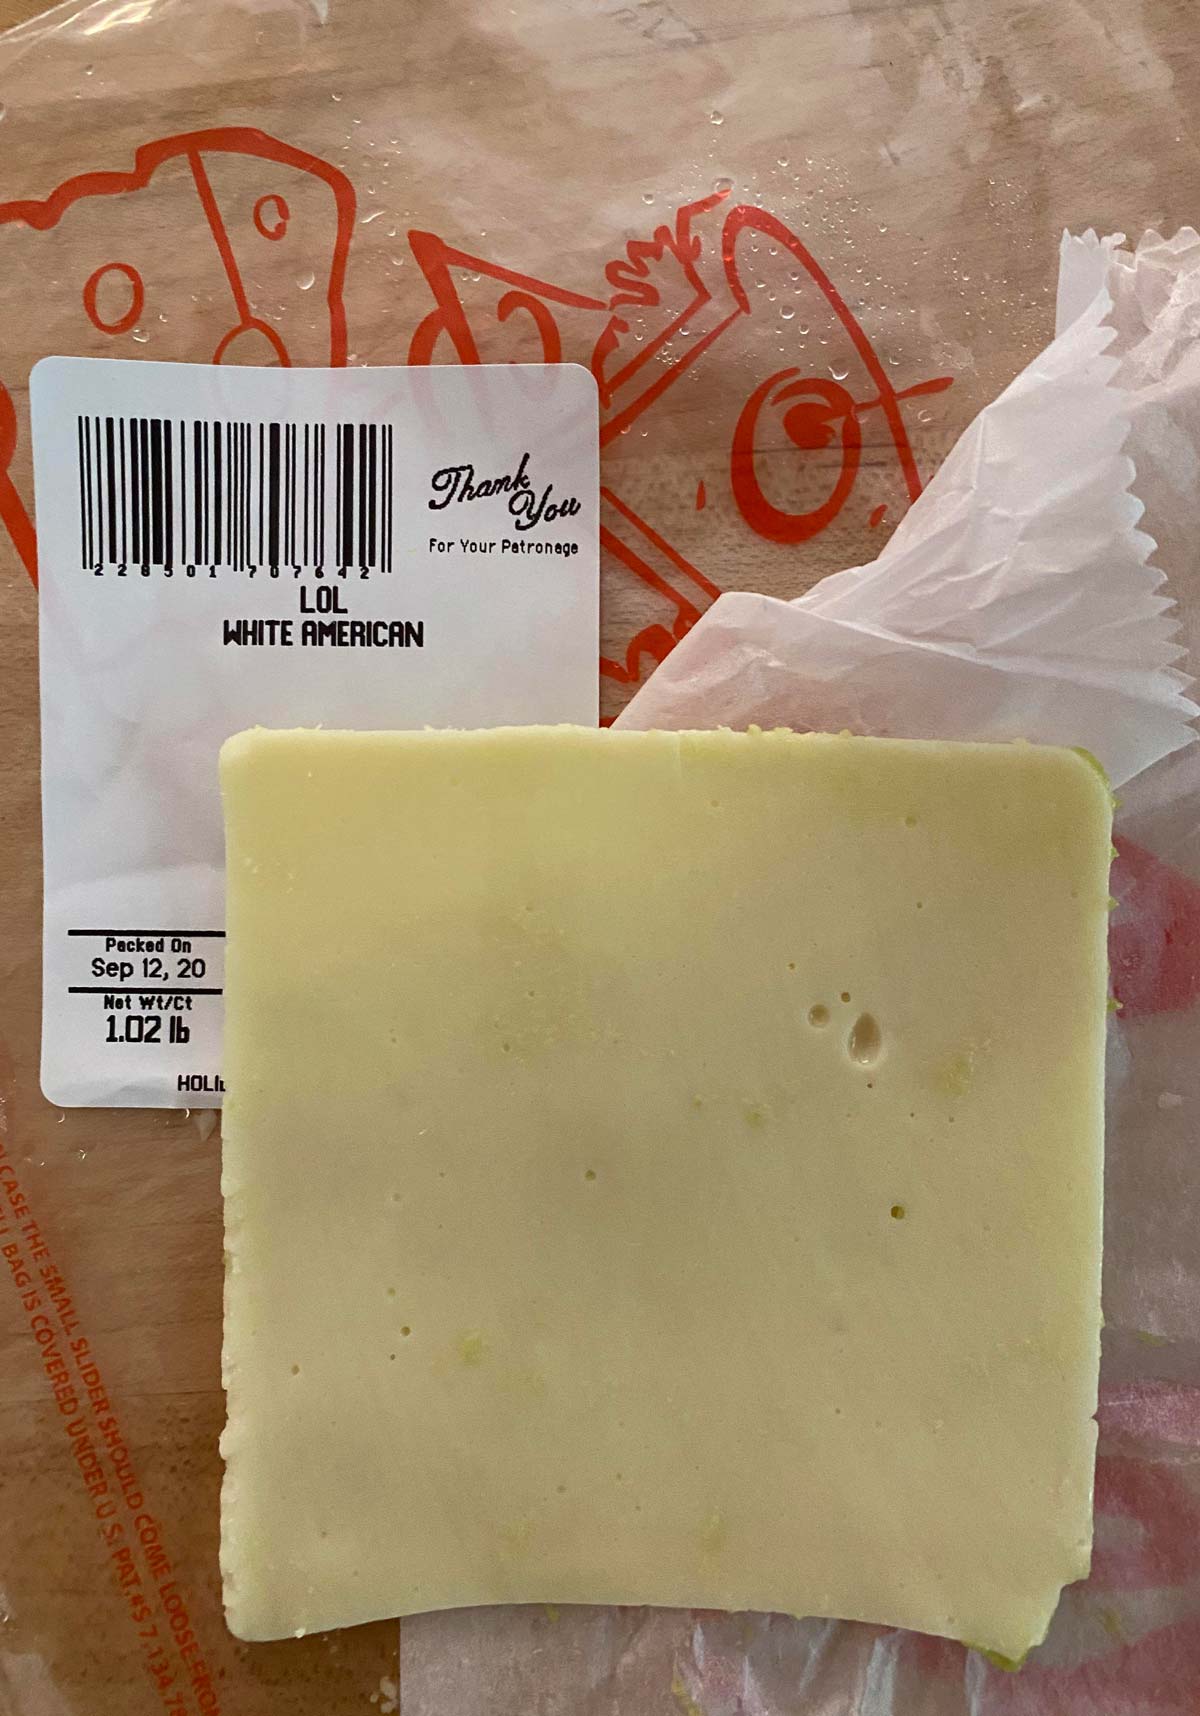 The cheese is mocking my heritage again